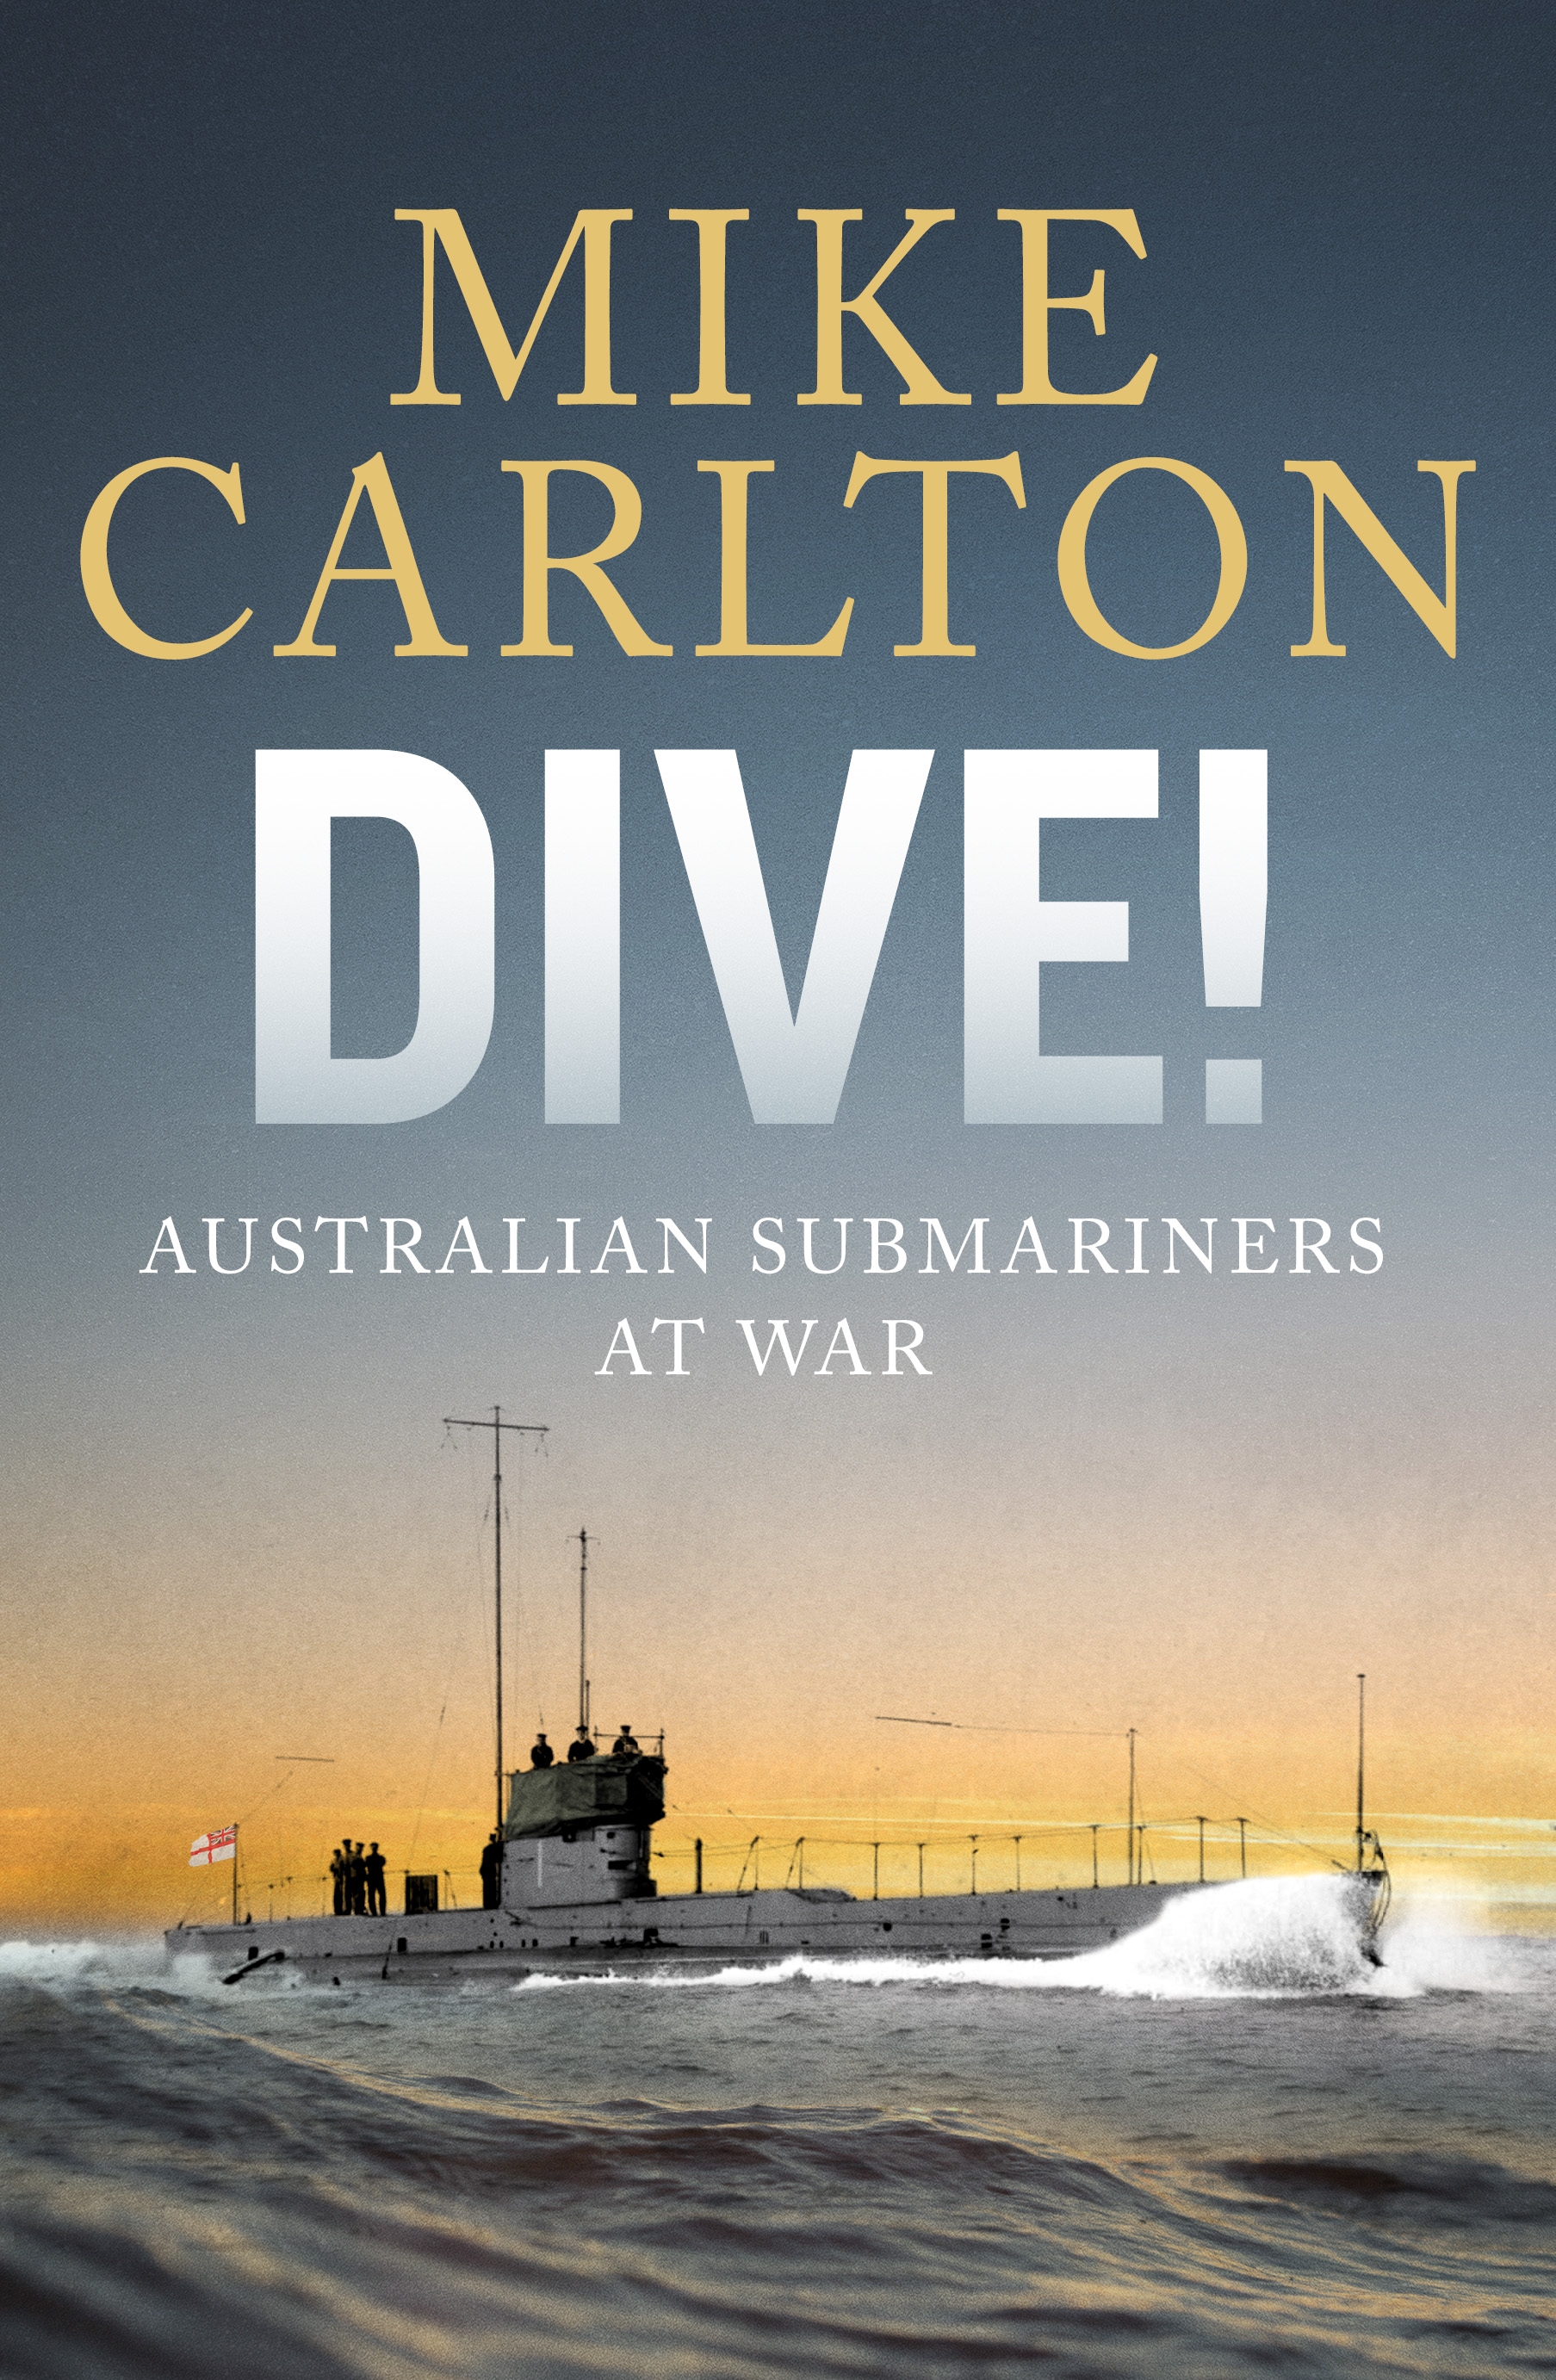 Book cover for book 'Dive!' by Mike Carlton depicting a half-submerged submarine.